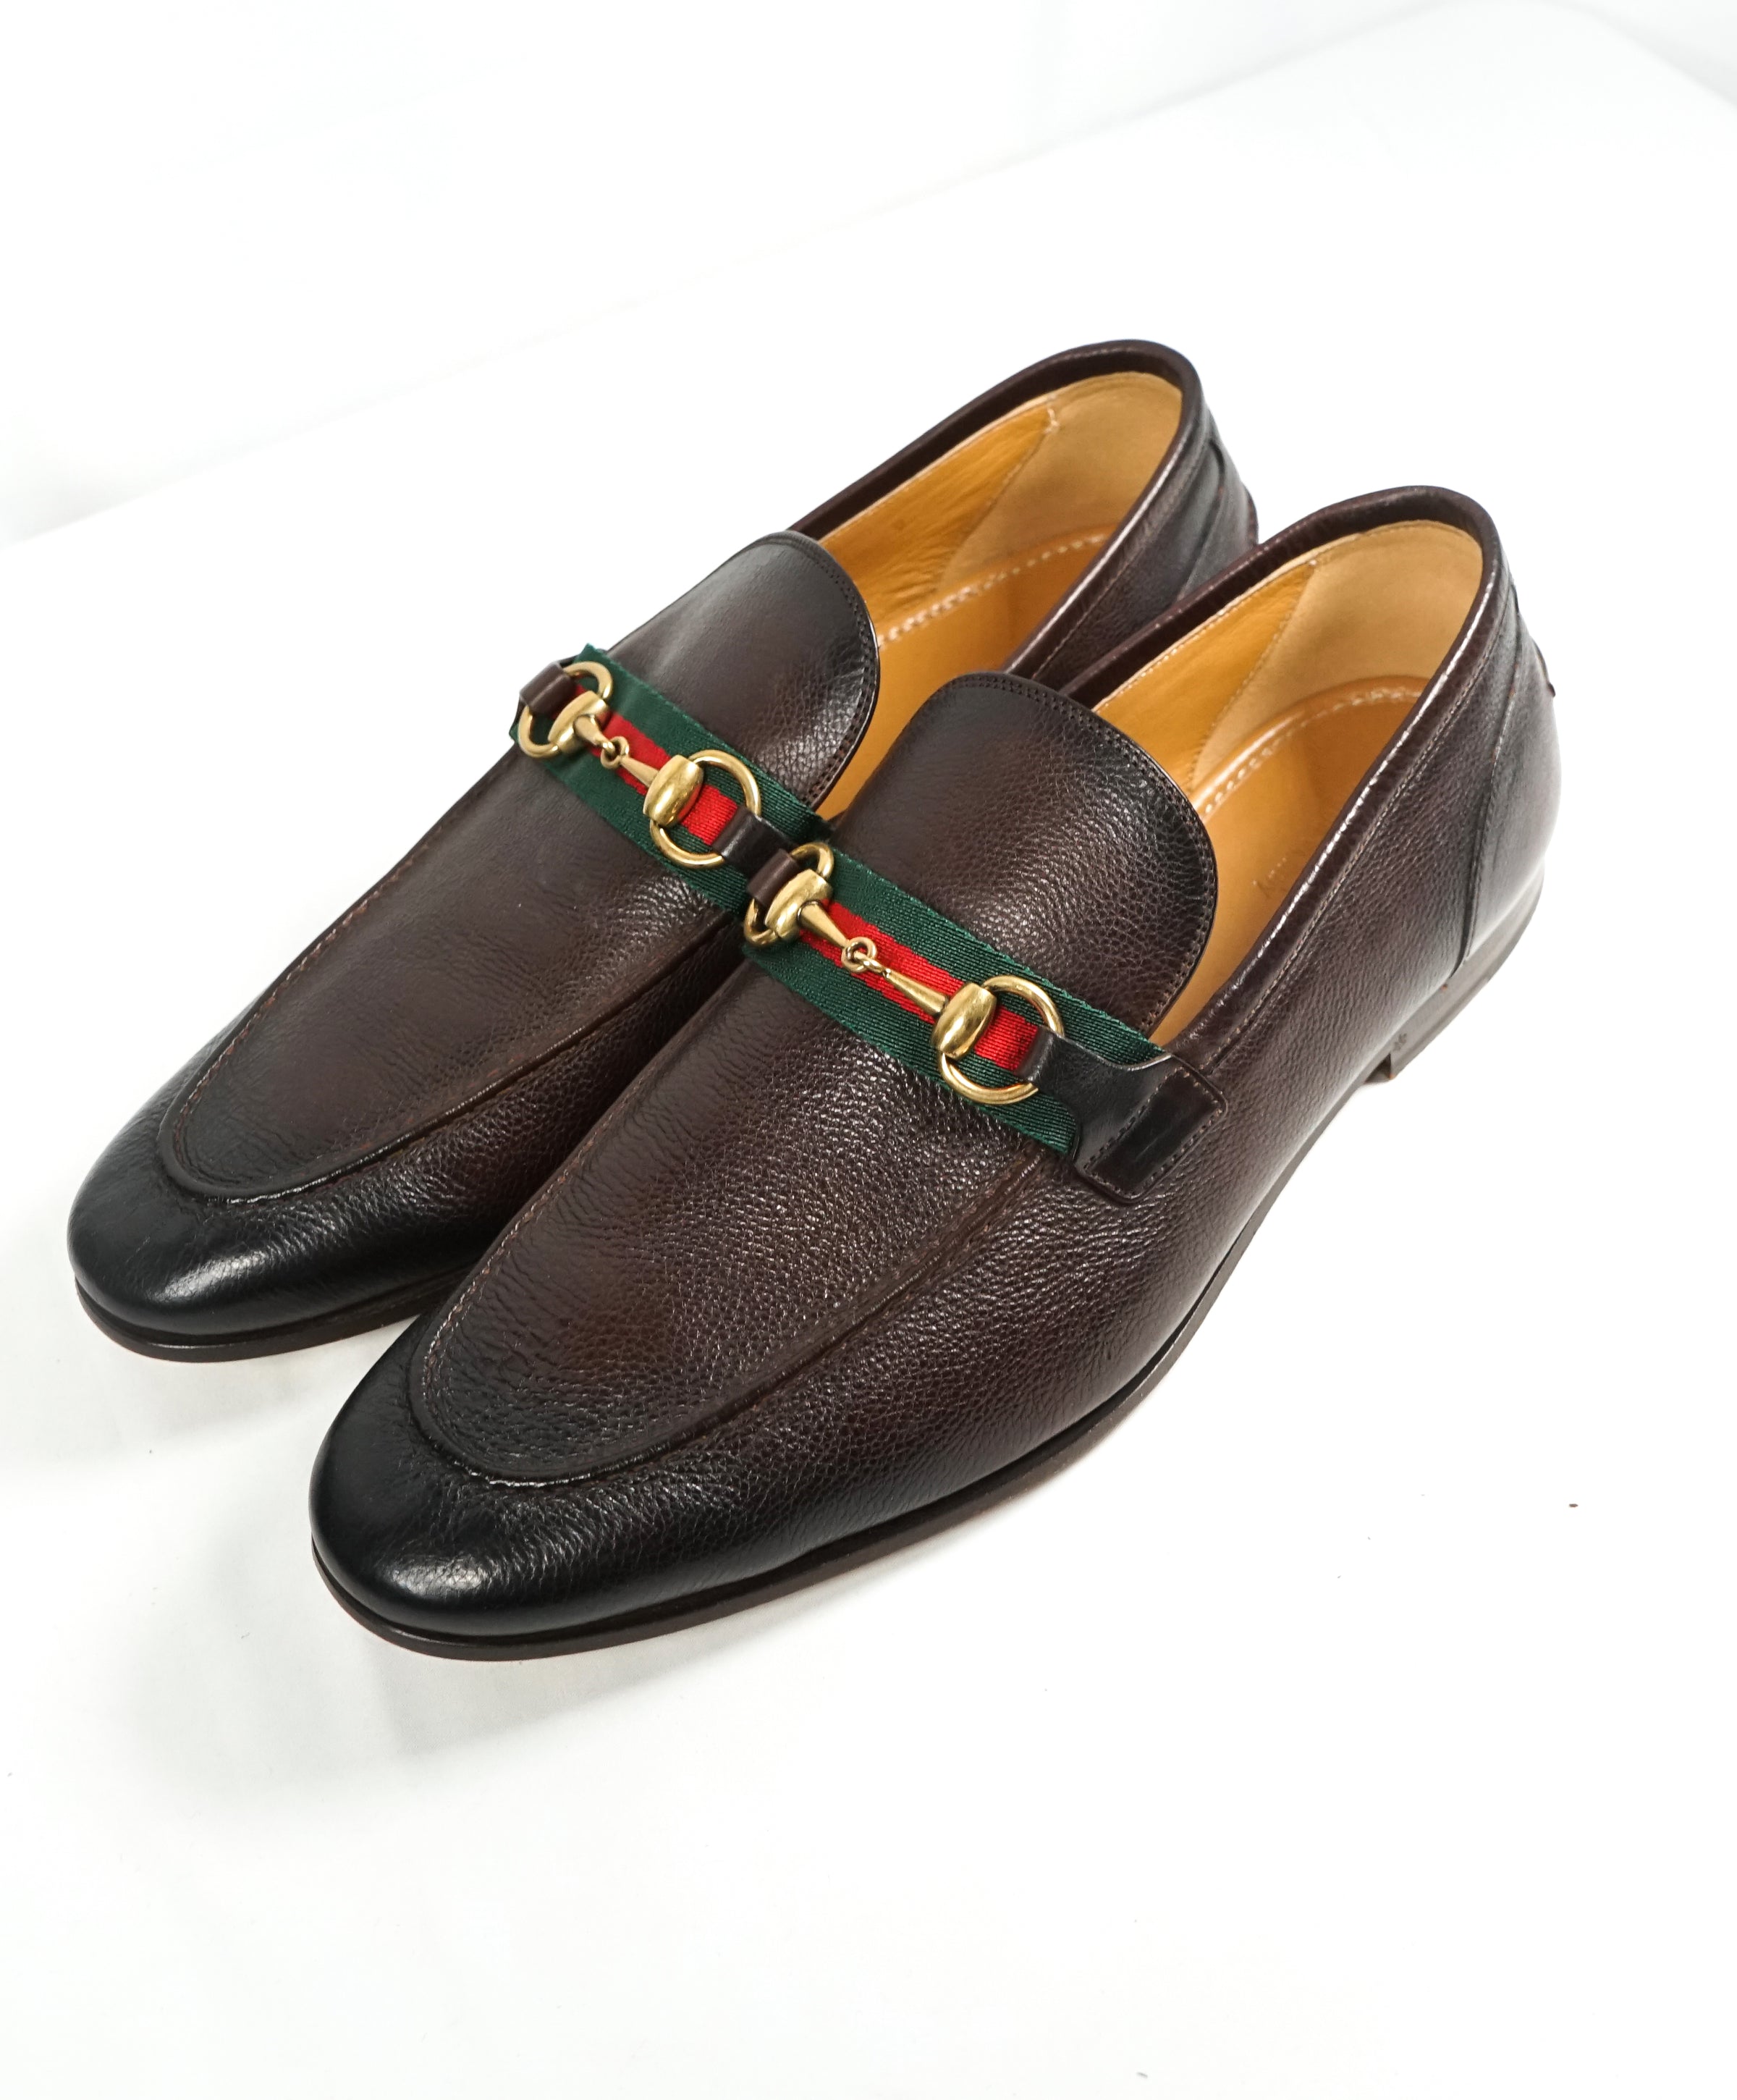 GUCCI - Iconic Green & Red Stripe Horsebit Loafers - 10 – Luxe Hanger